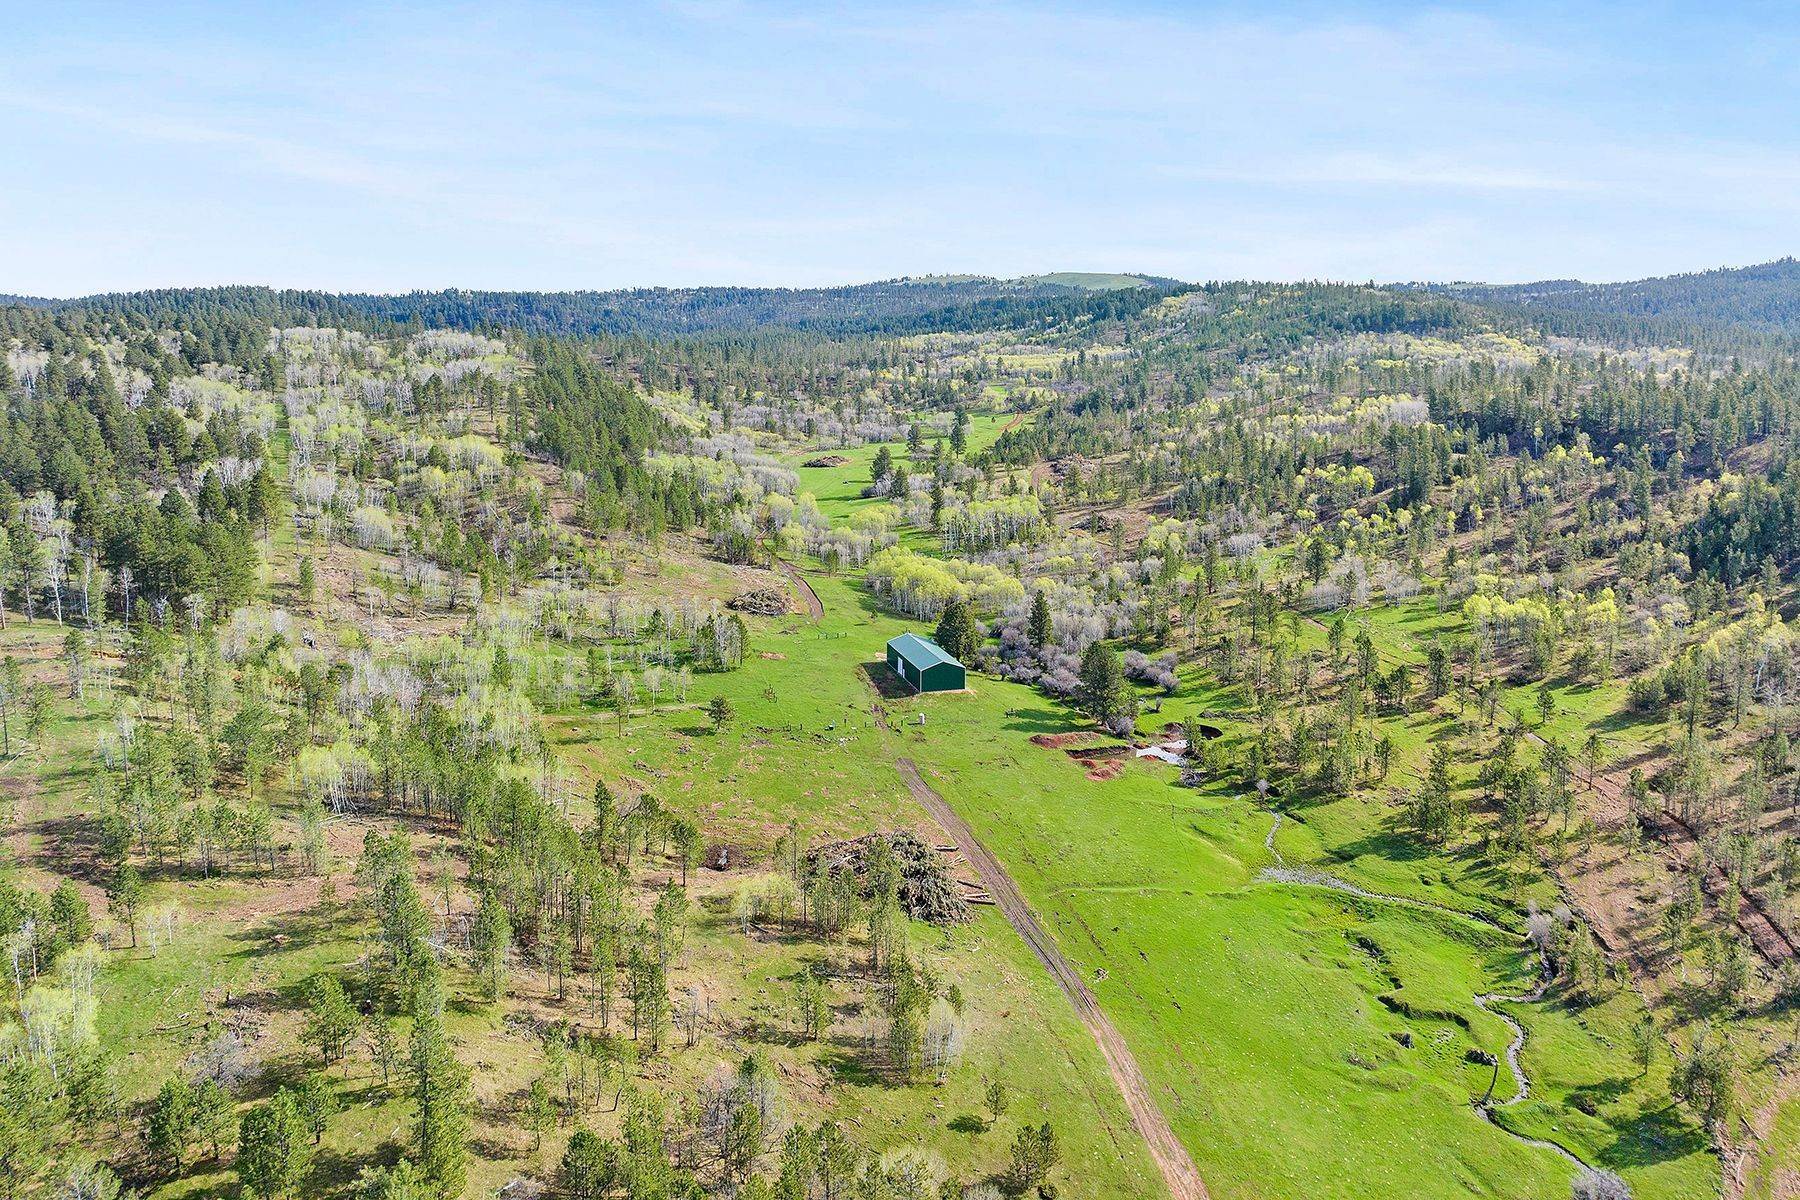 18. Farm and Ranch Properties for Sale at Black Hills Sundance Ranch 140 Cow Camp Road Sundance, Wyoming 82729 United States